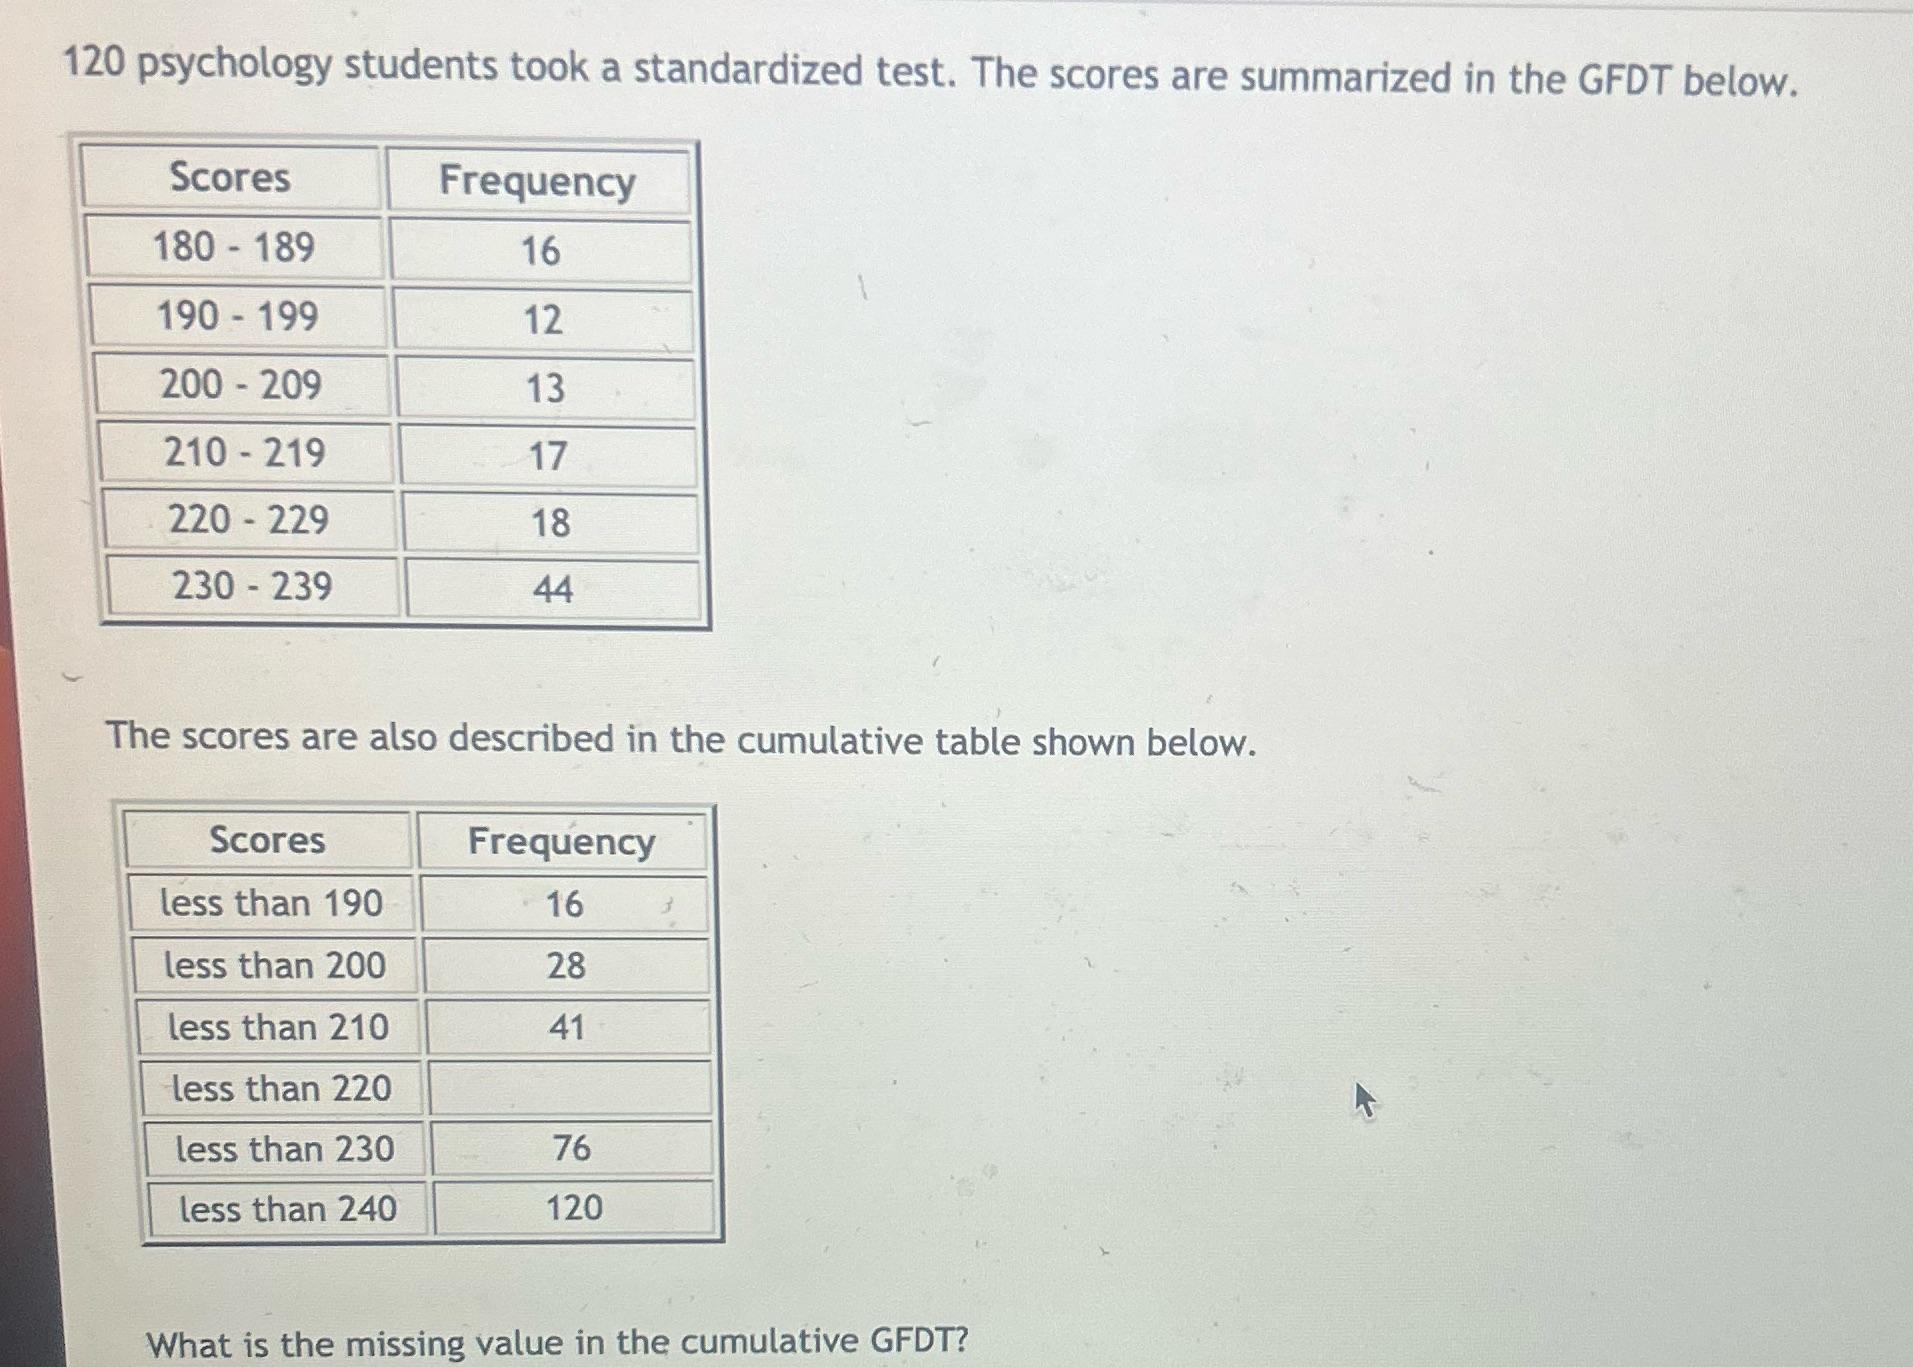 120 psychology students took a standardized test. The scores are summarized in the GFDT below. Scores 180-189